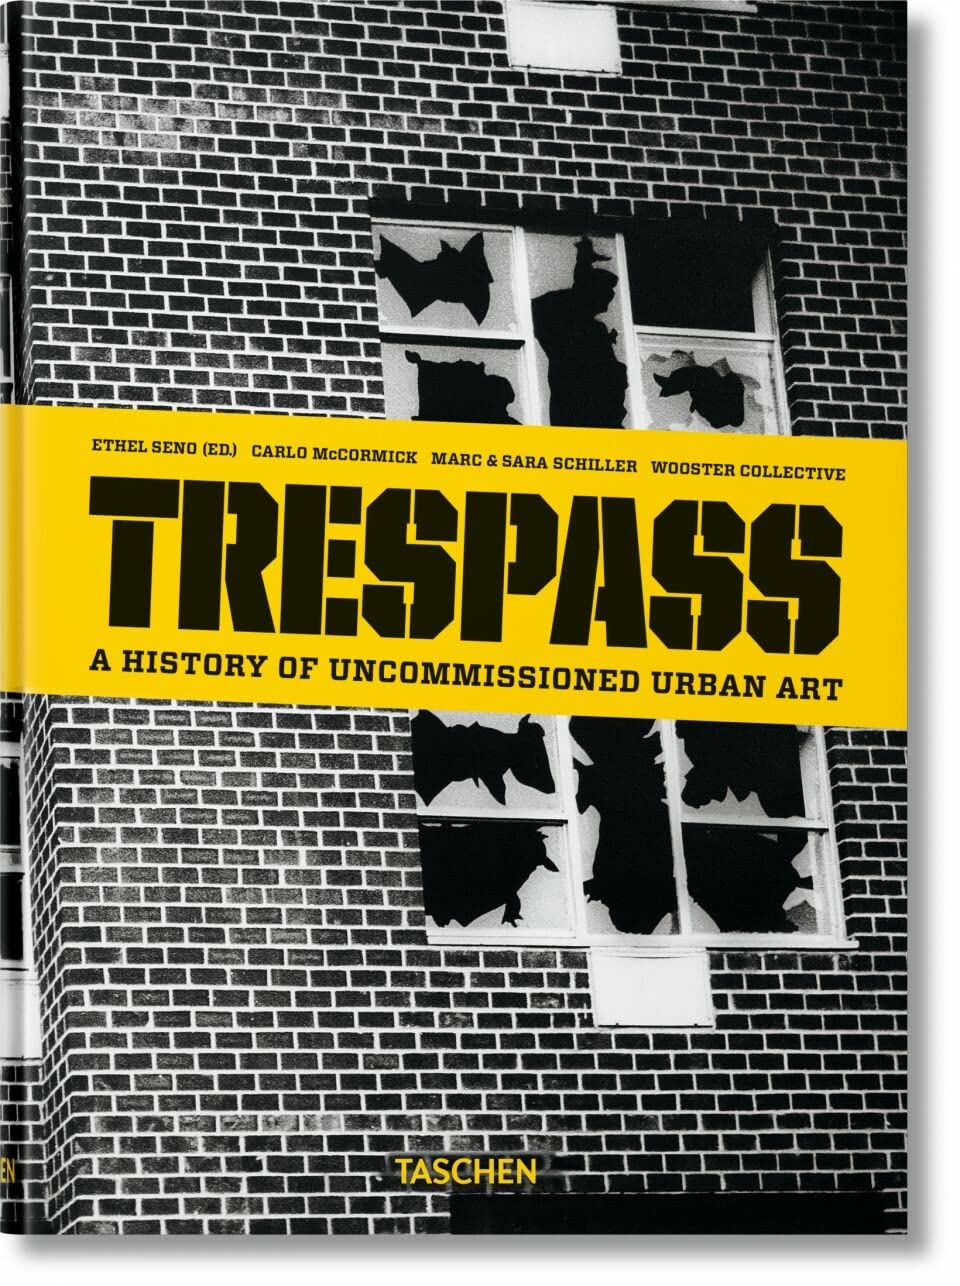 Trespass: A History Of Uncommissioned Urban Art